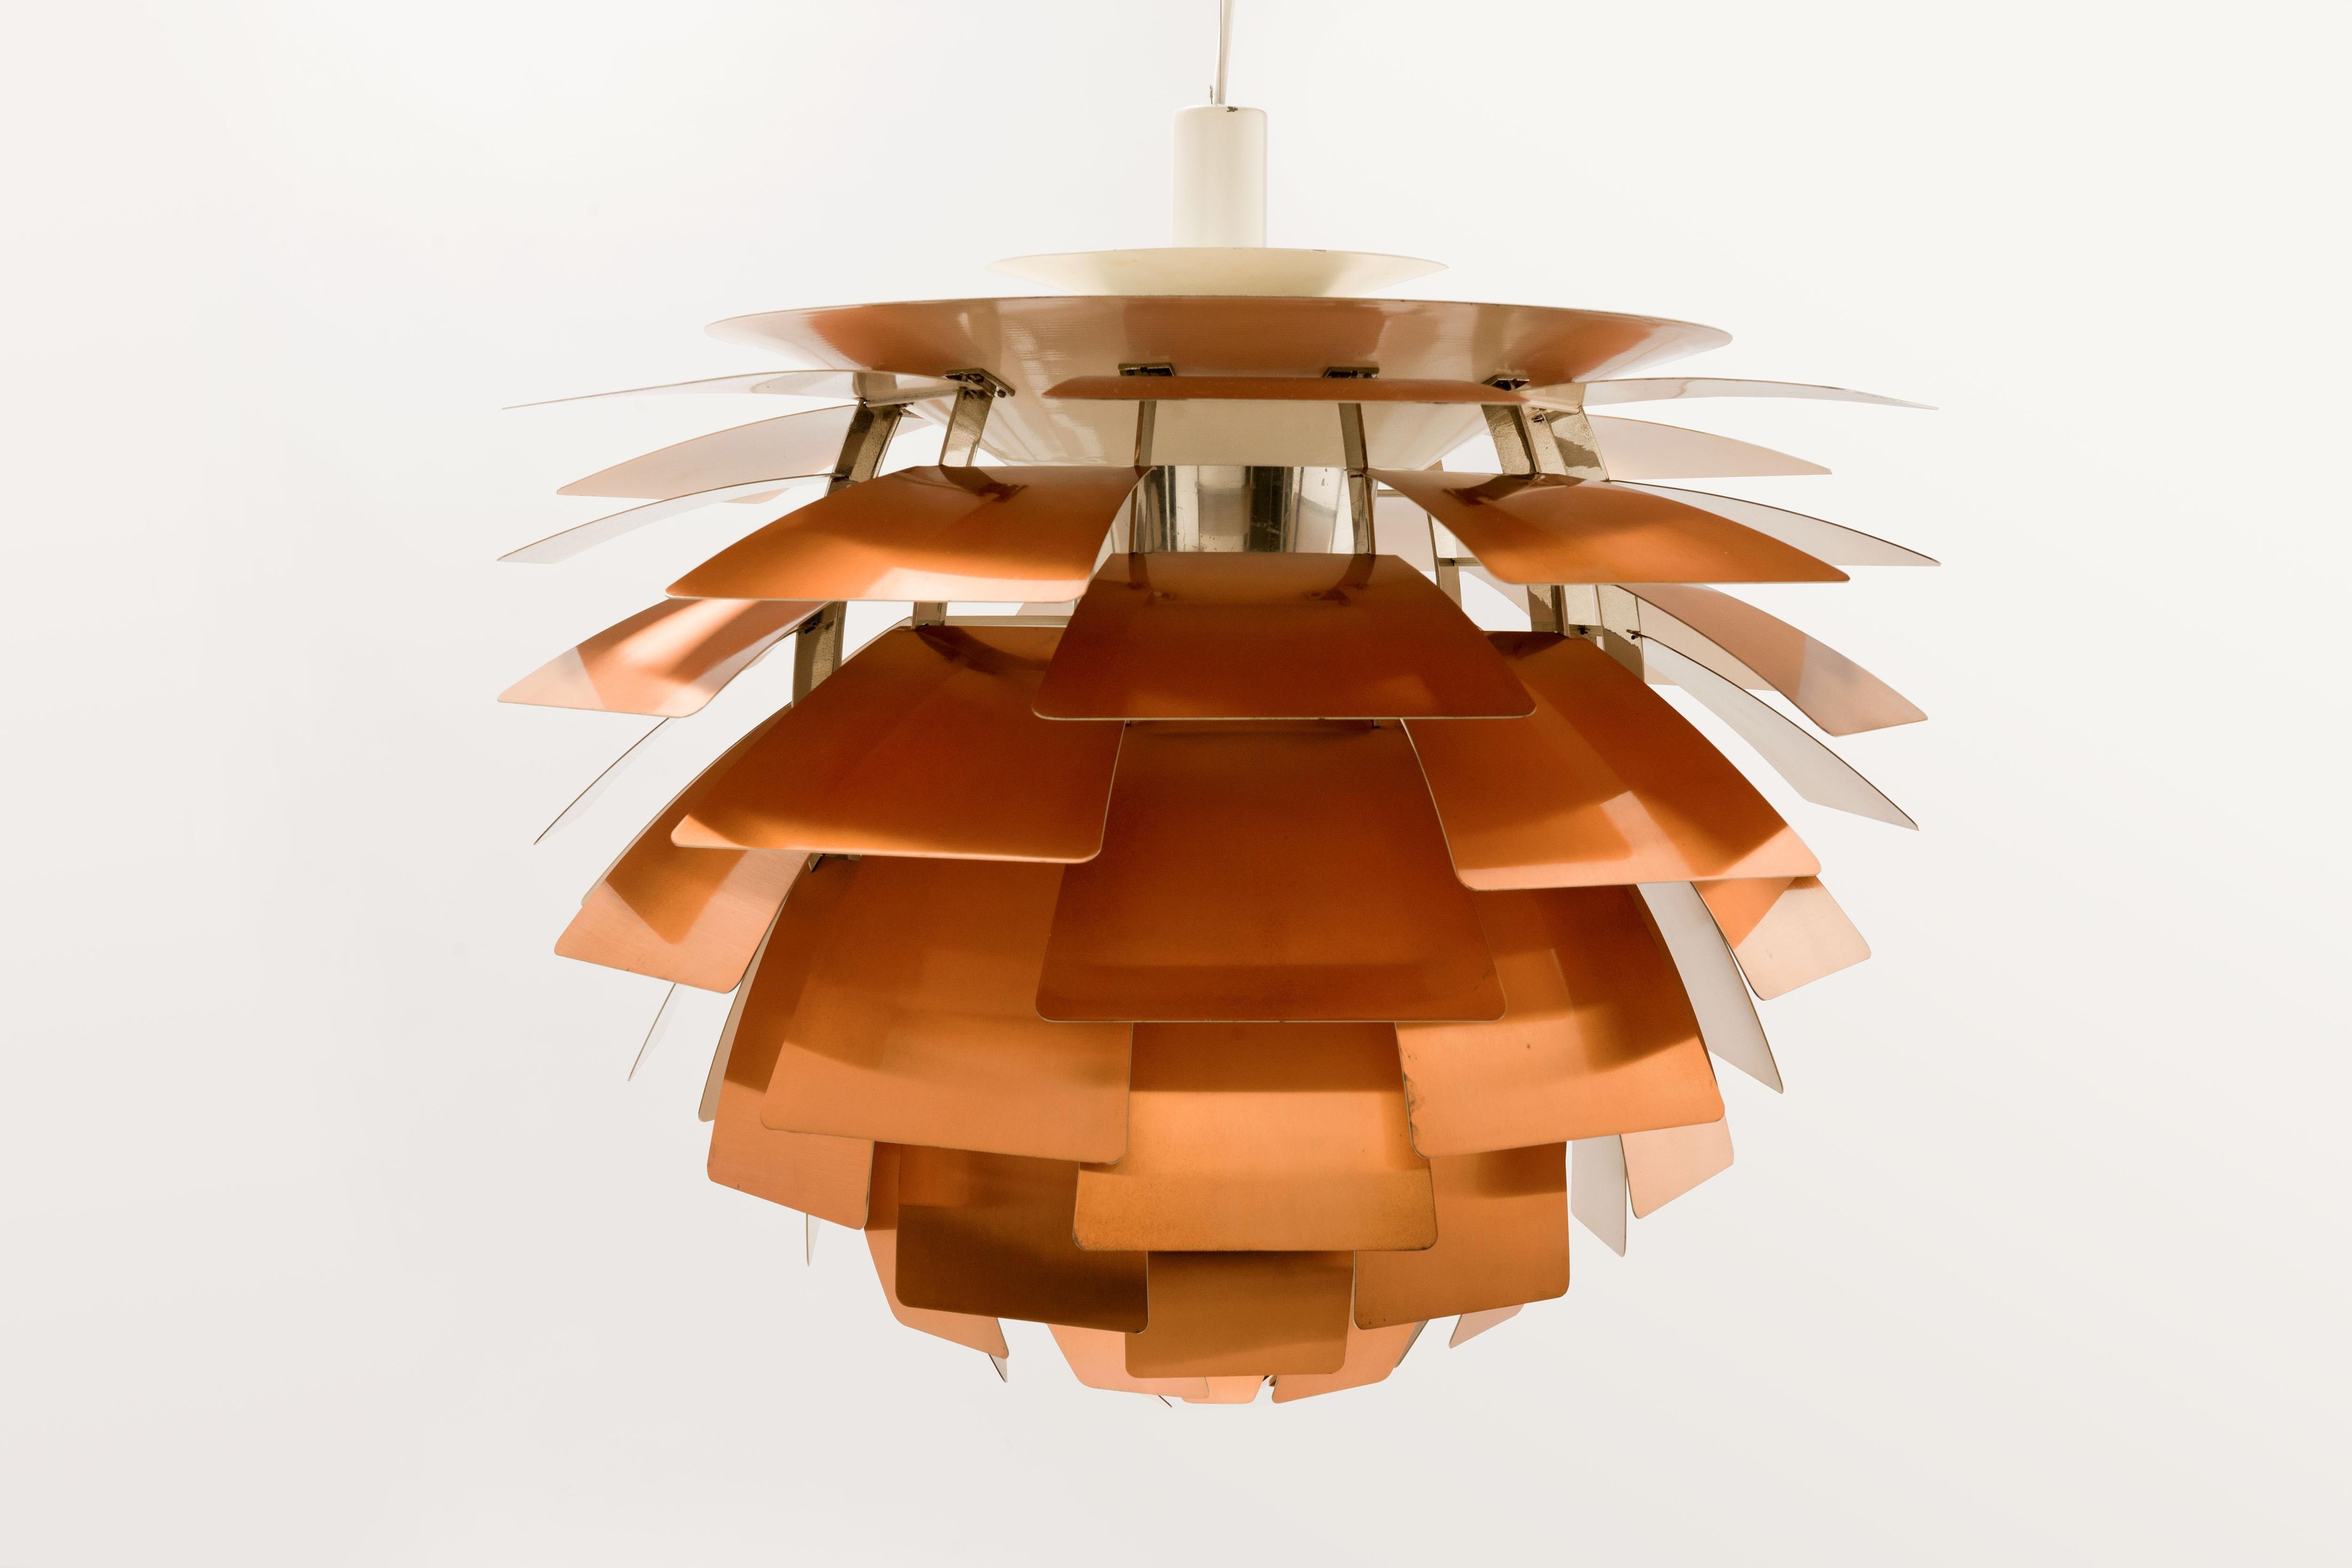 Rare first production series Artichoke, executed from a stunning aged golden copper, pendant by Poul Henningsen with production period related steel handles (2) on top rim. 
Originally designed in 1958 for a restaurant in Copenhagen called the